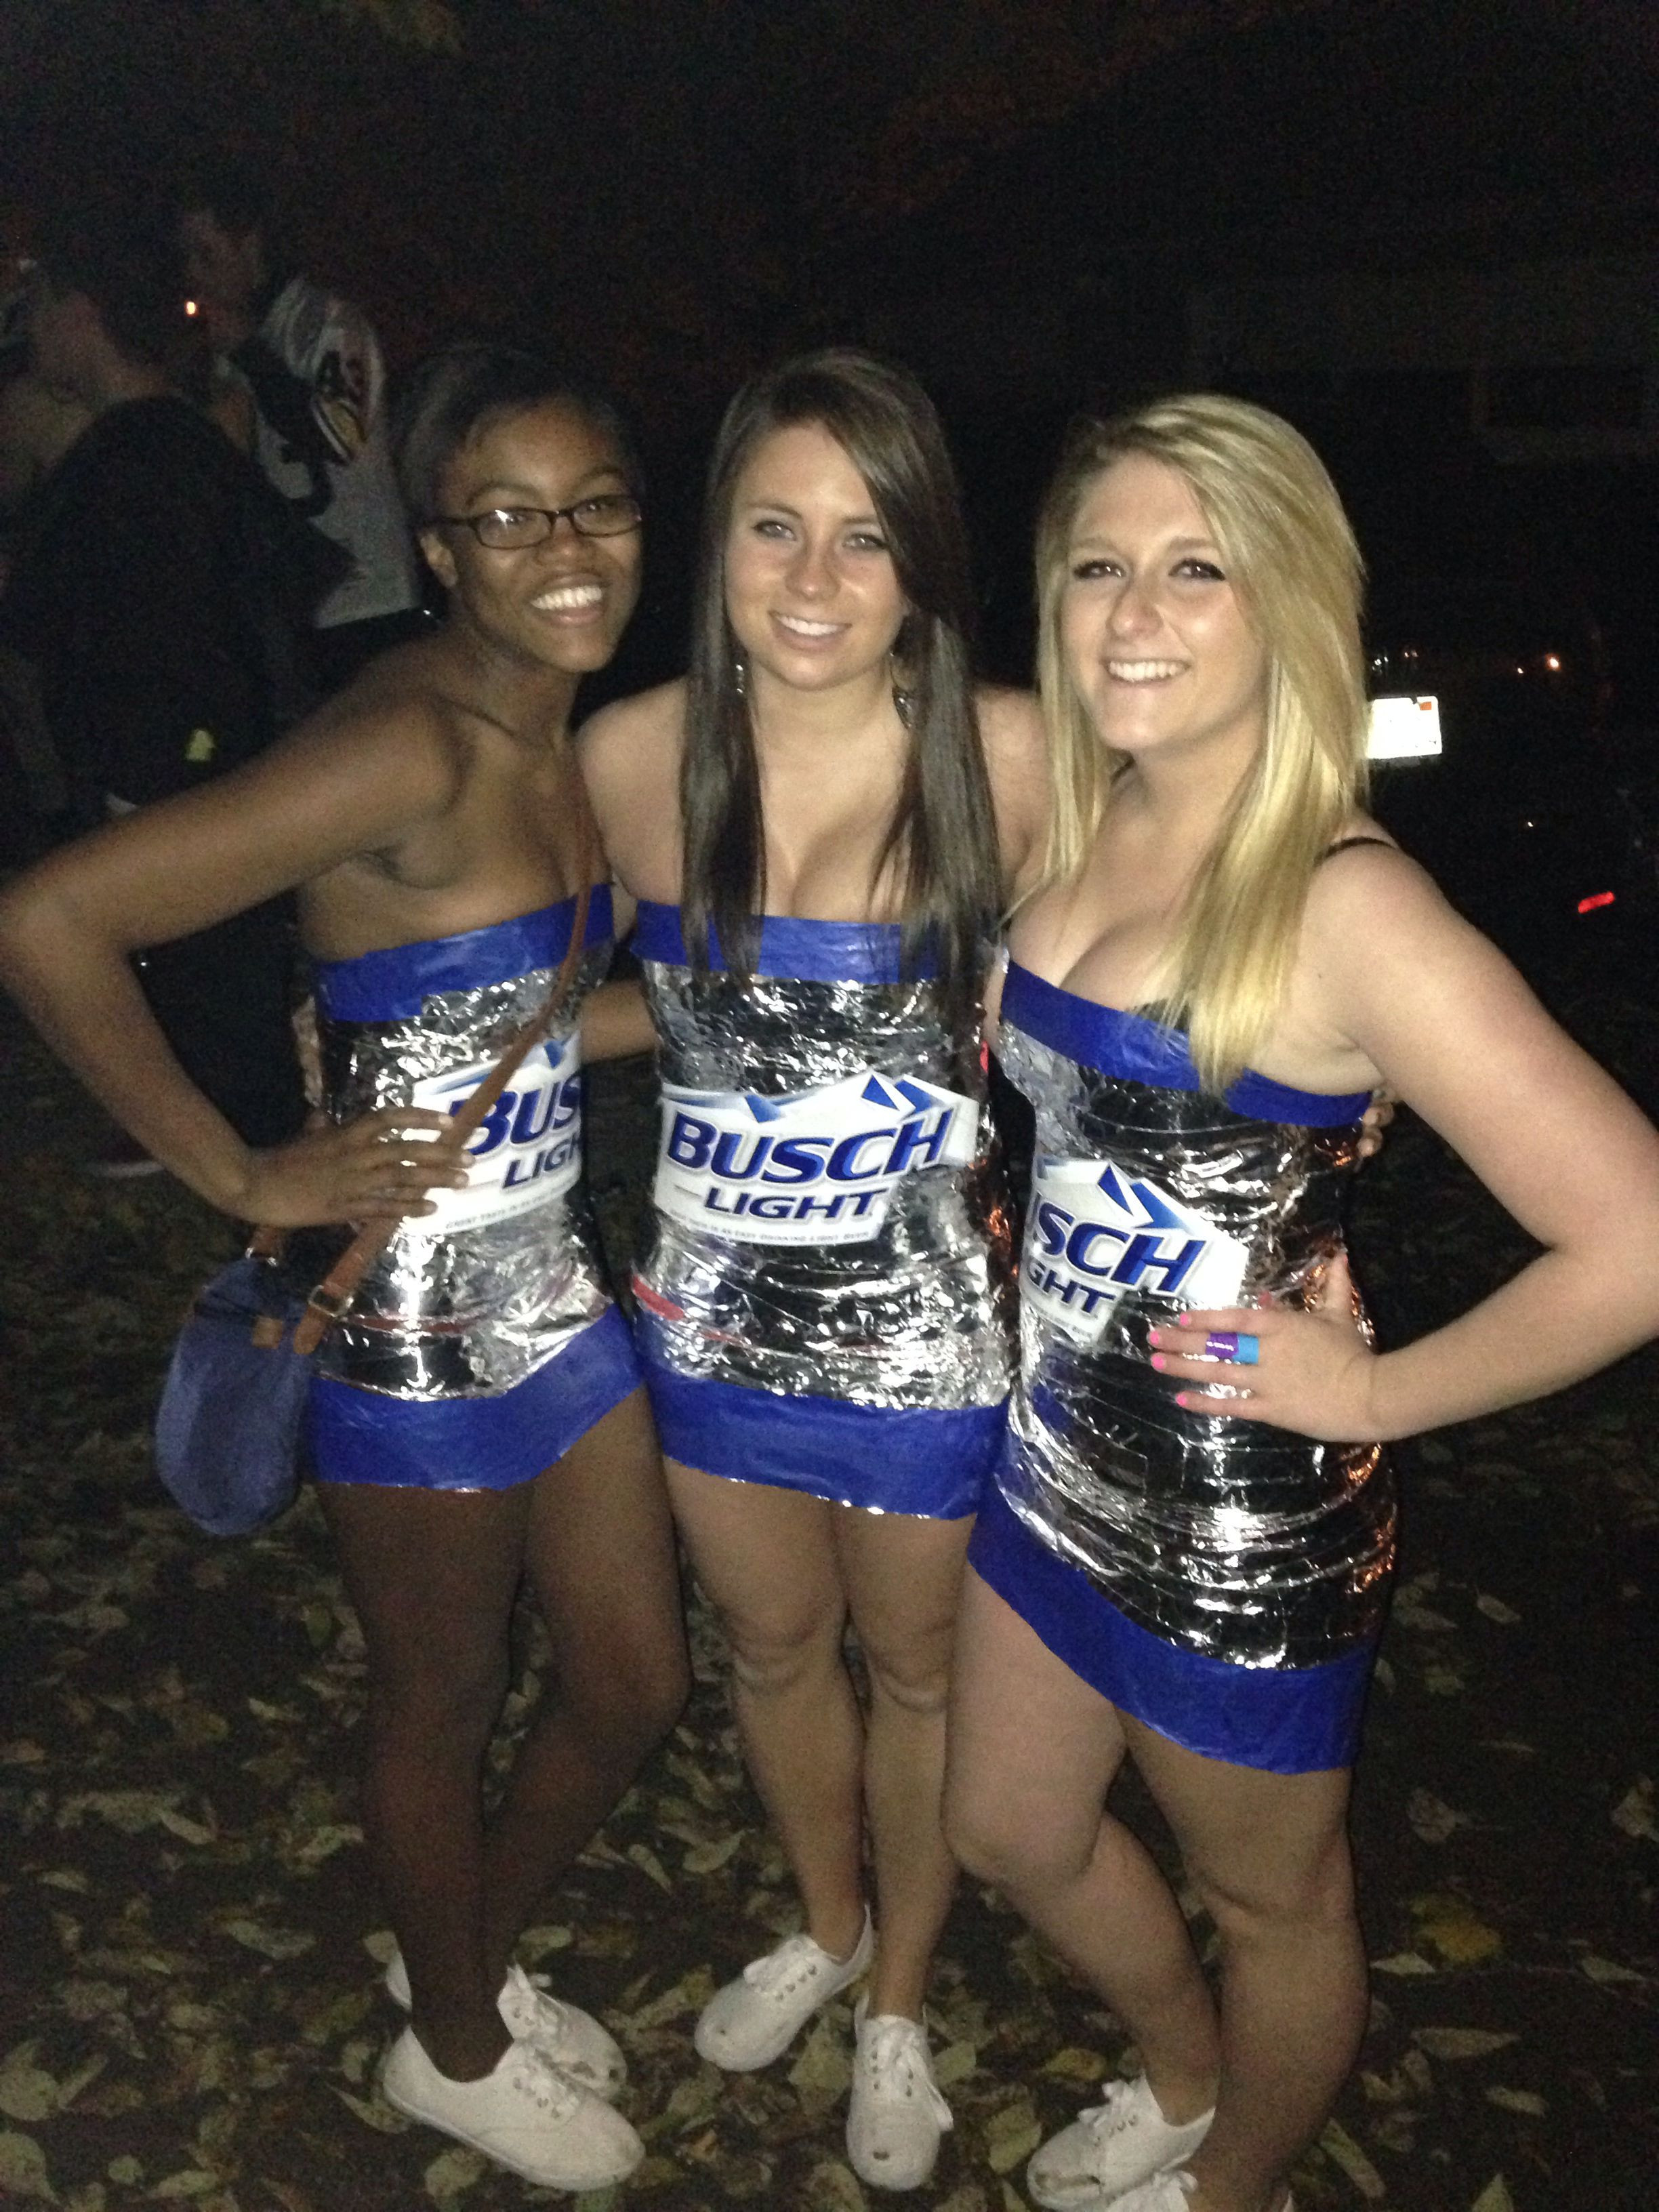 Halloween Costume Ideas College Party
 Busch light duct tape Anything but clothes party idea